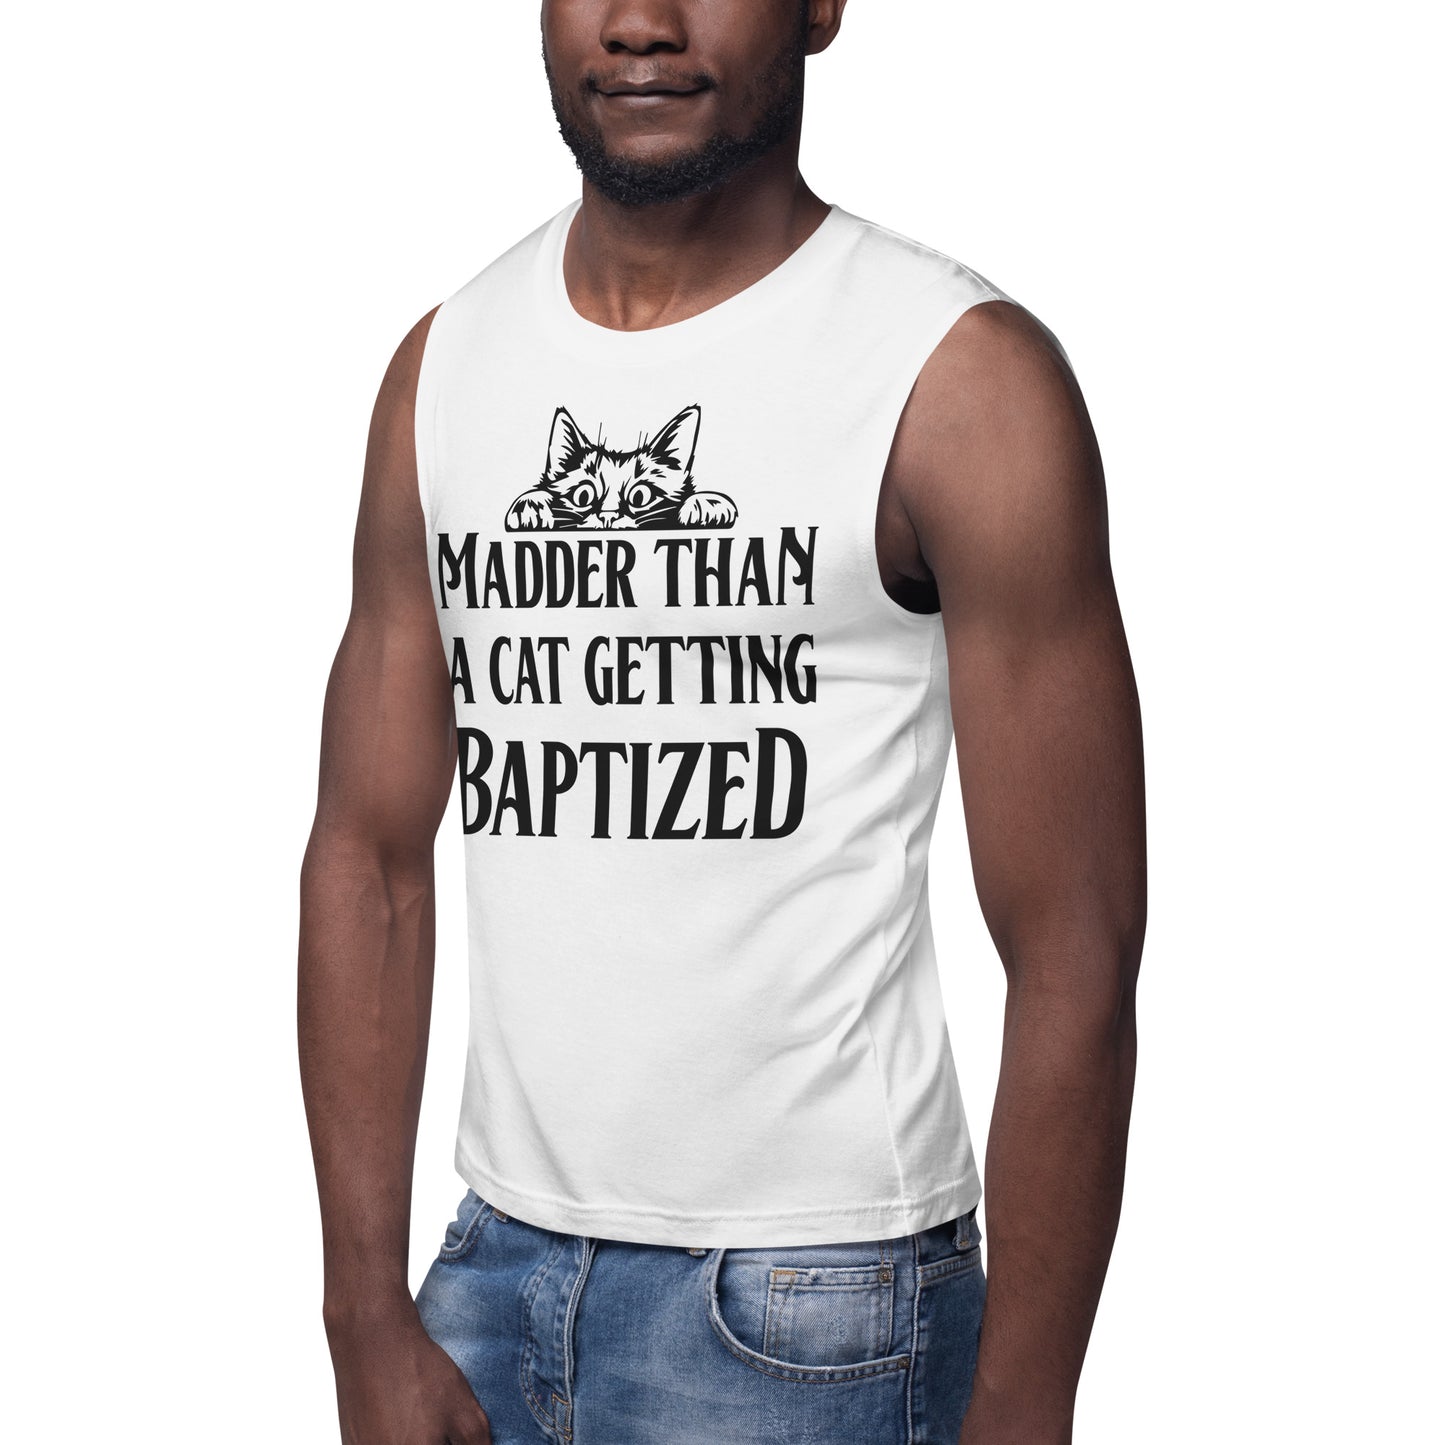 Madder than a Cat Getting Baptized / Unisex Muscle Shirt